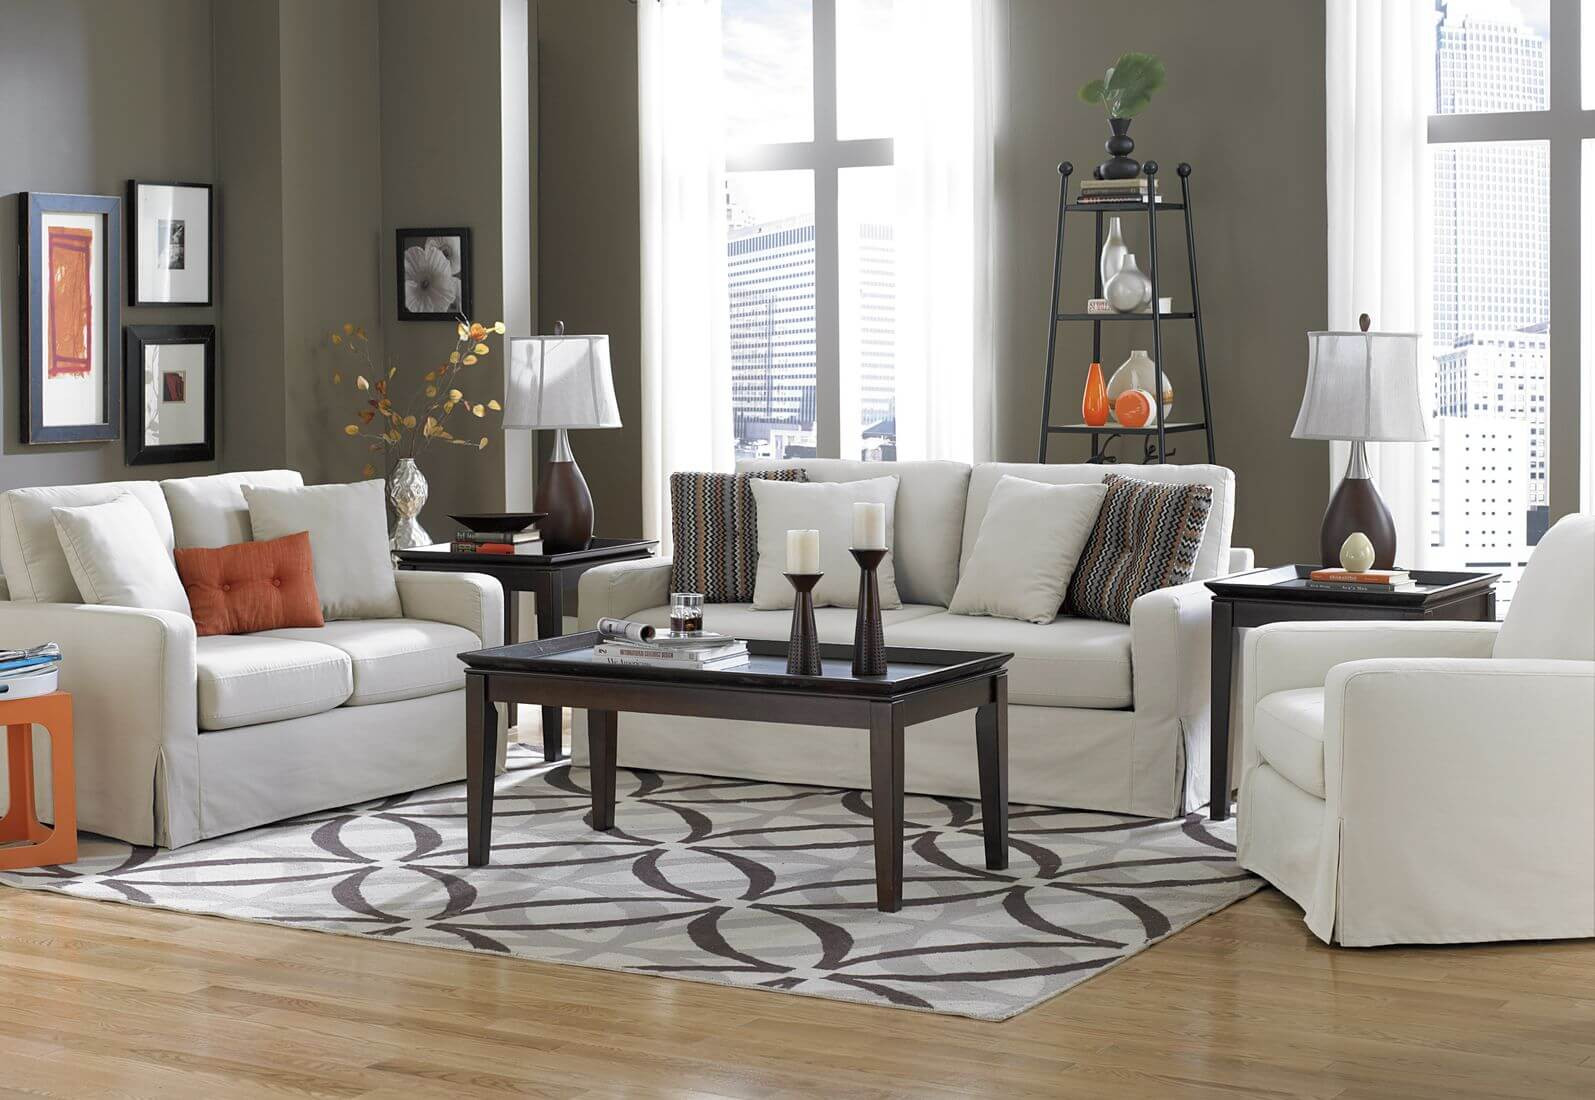 Rug Living Room
 40 Living Rooms with Area Rugs for Warmth & Richness